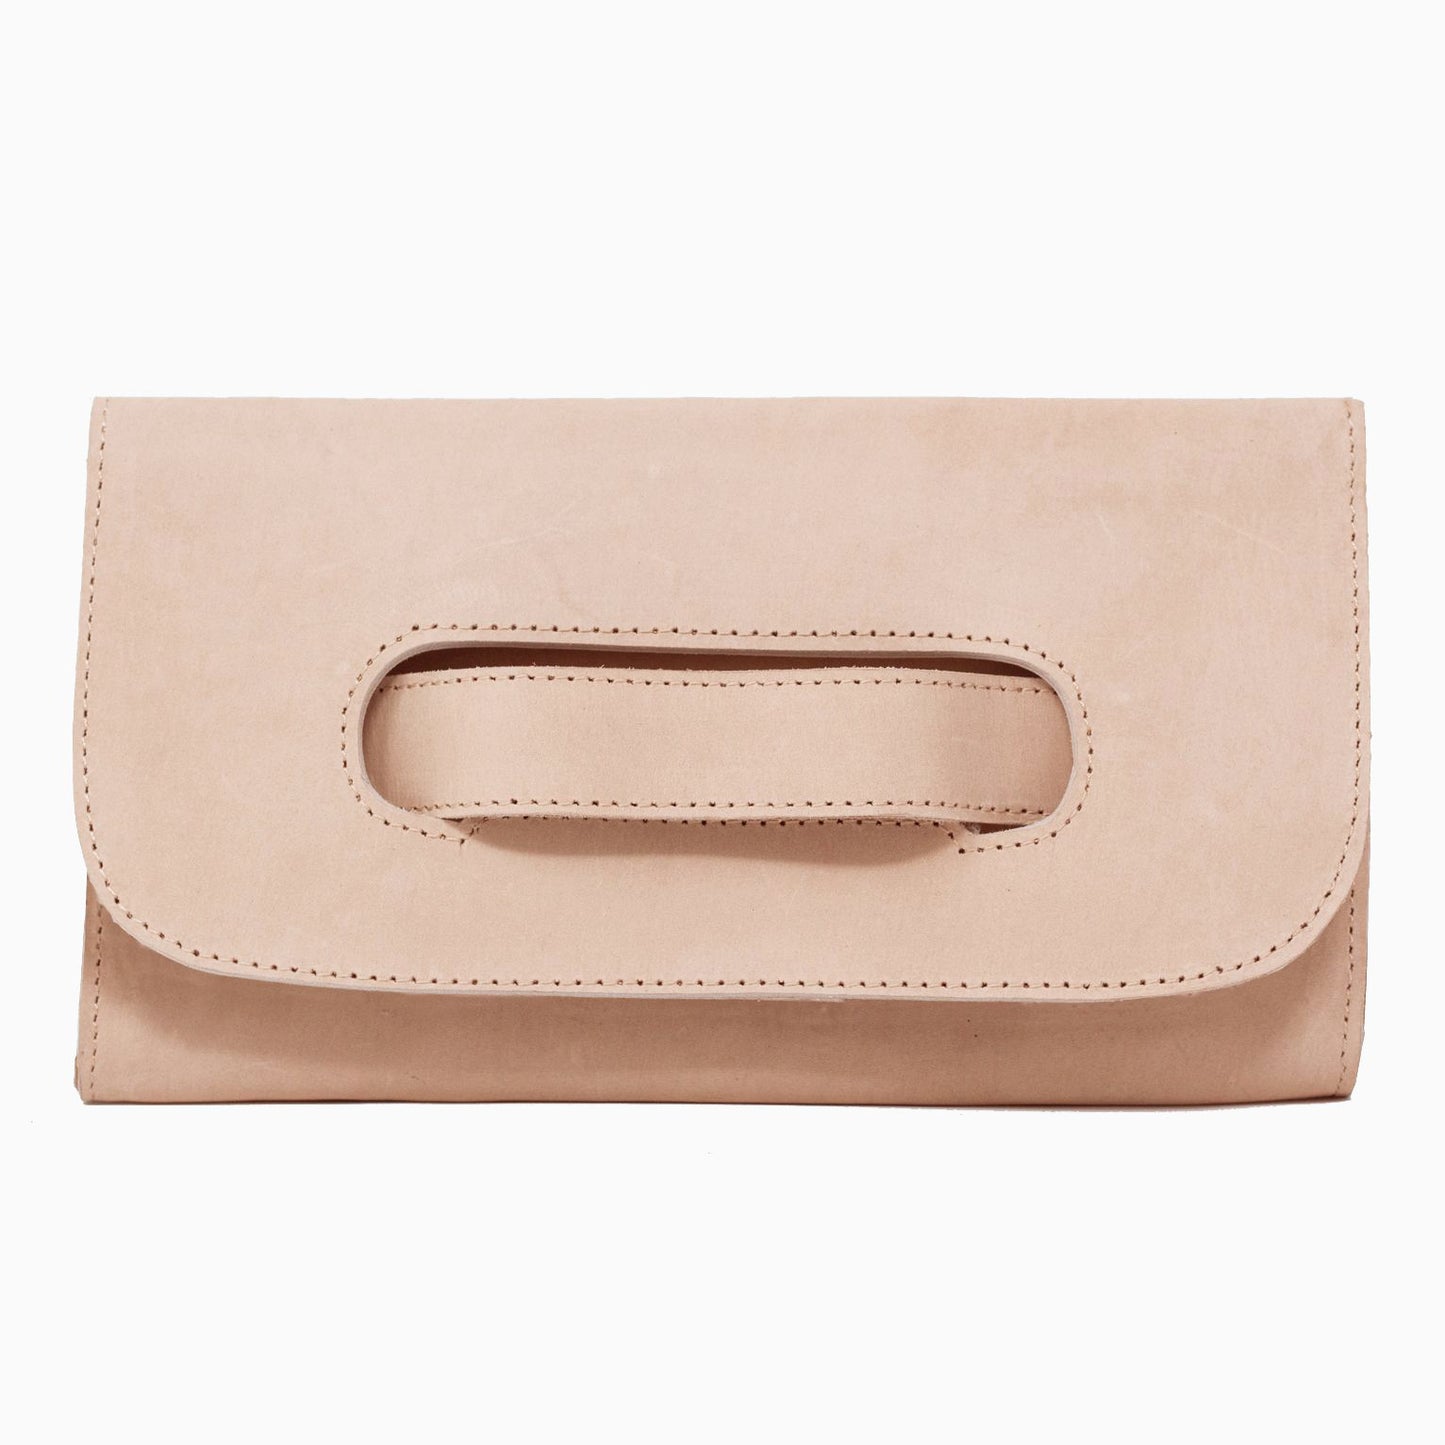 Mare Handled Leather Clutch